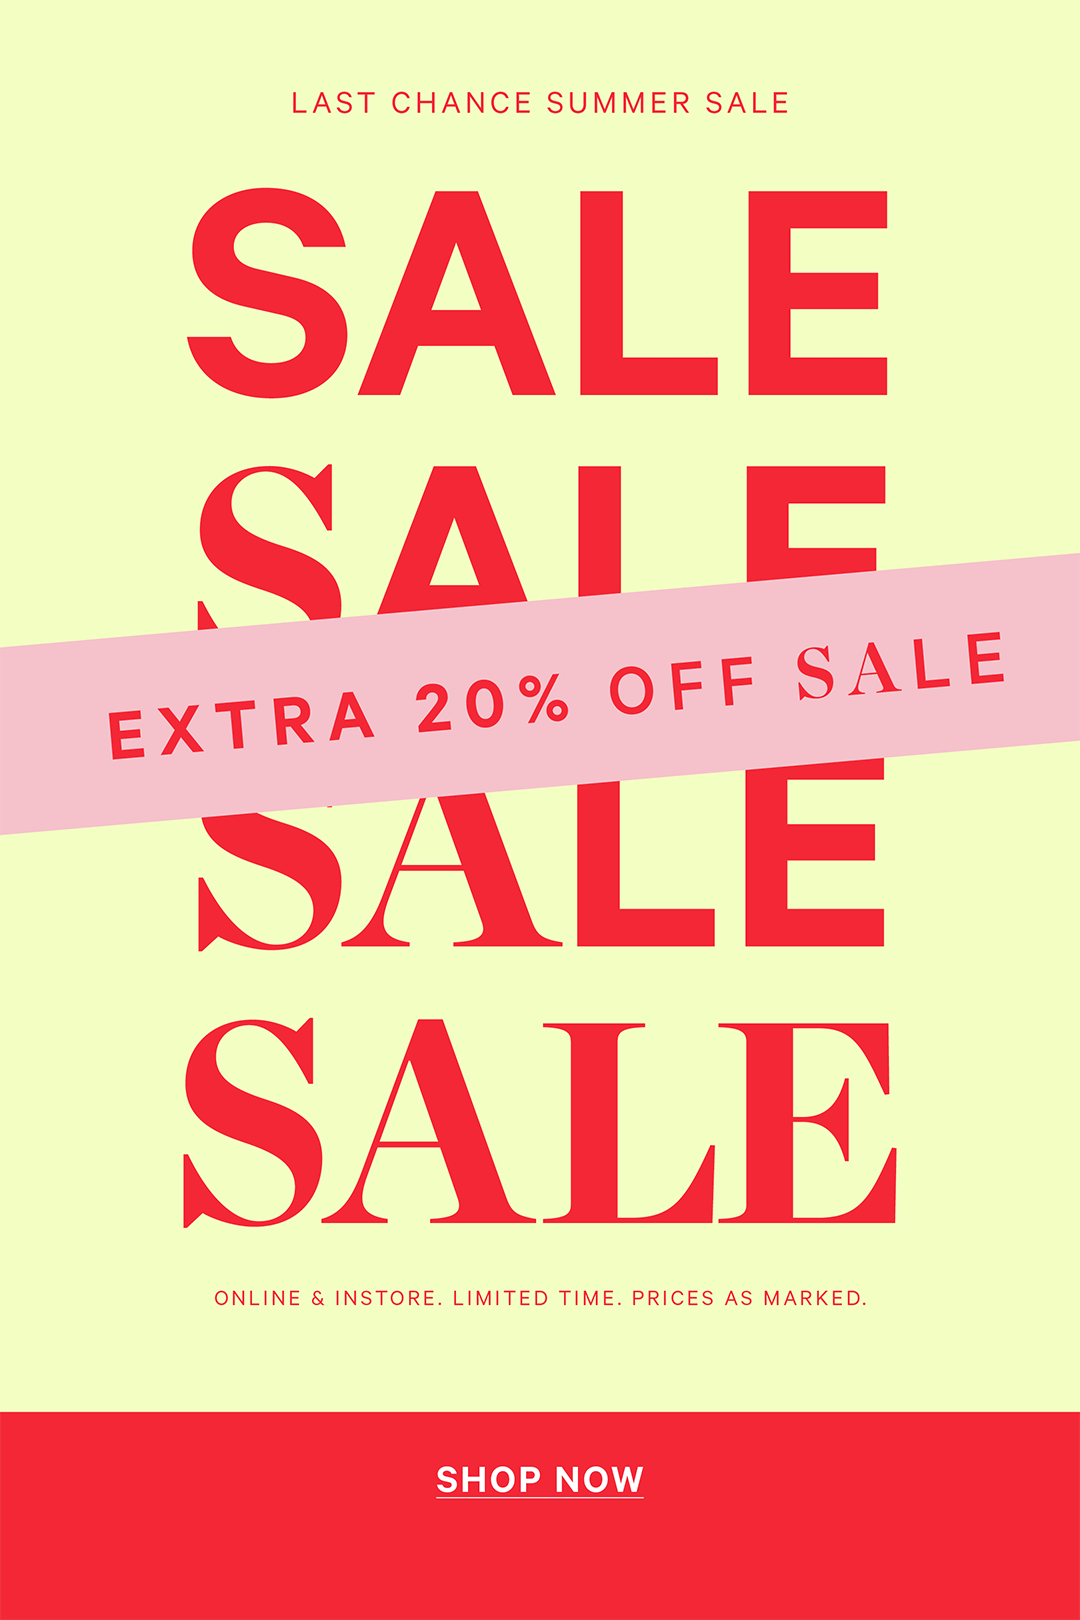 Extra 20% Off Sale! Online & Instore*